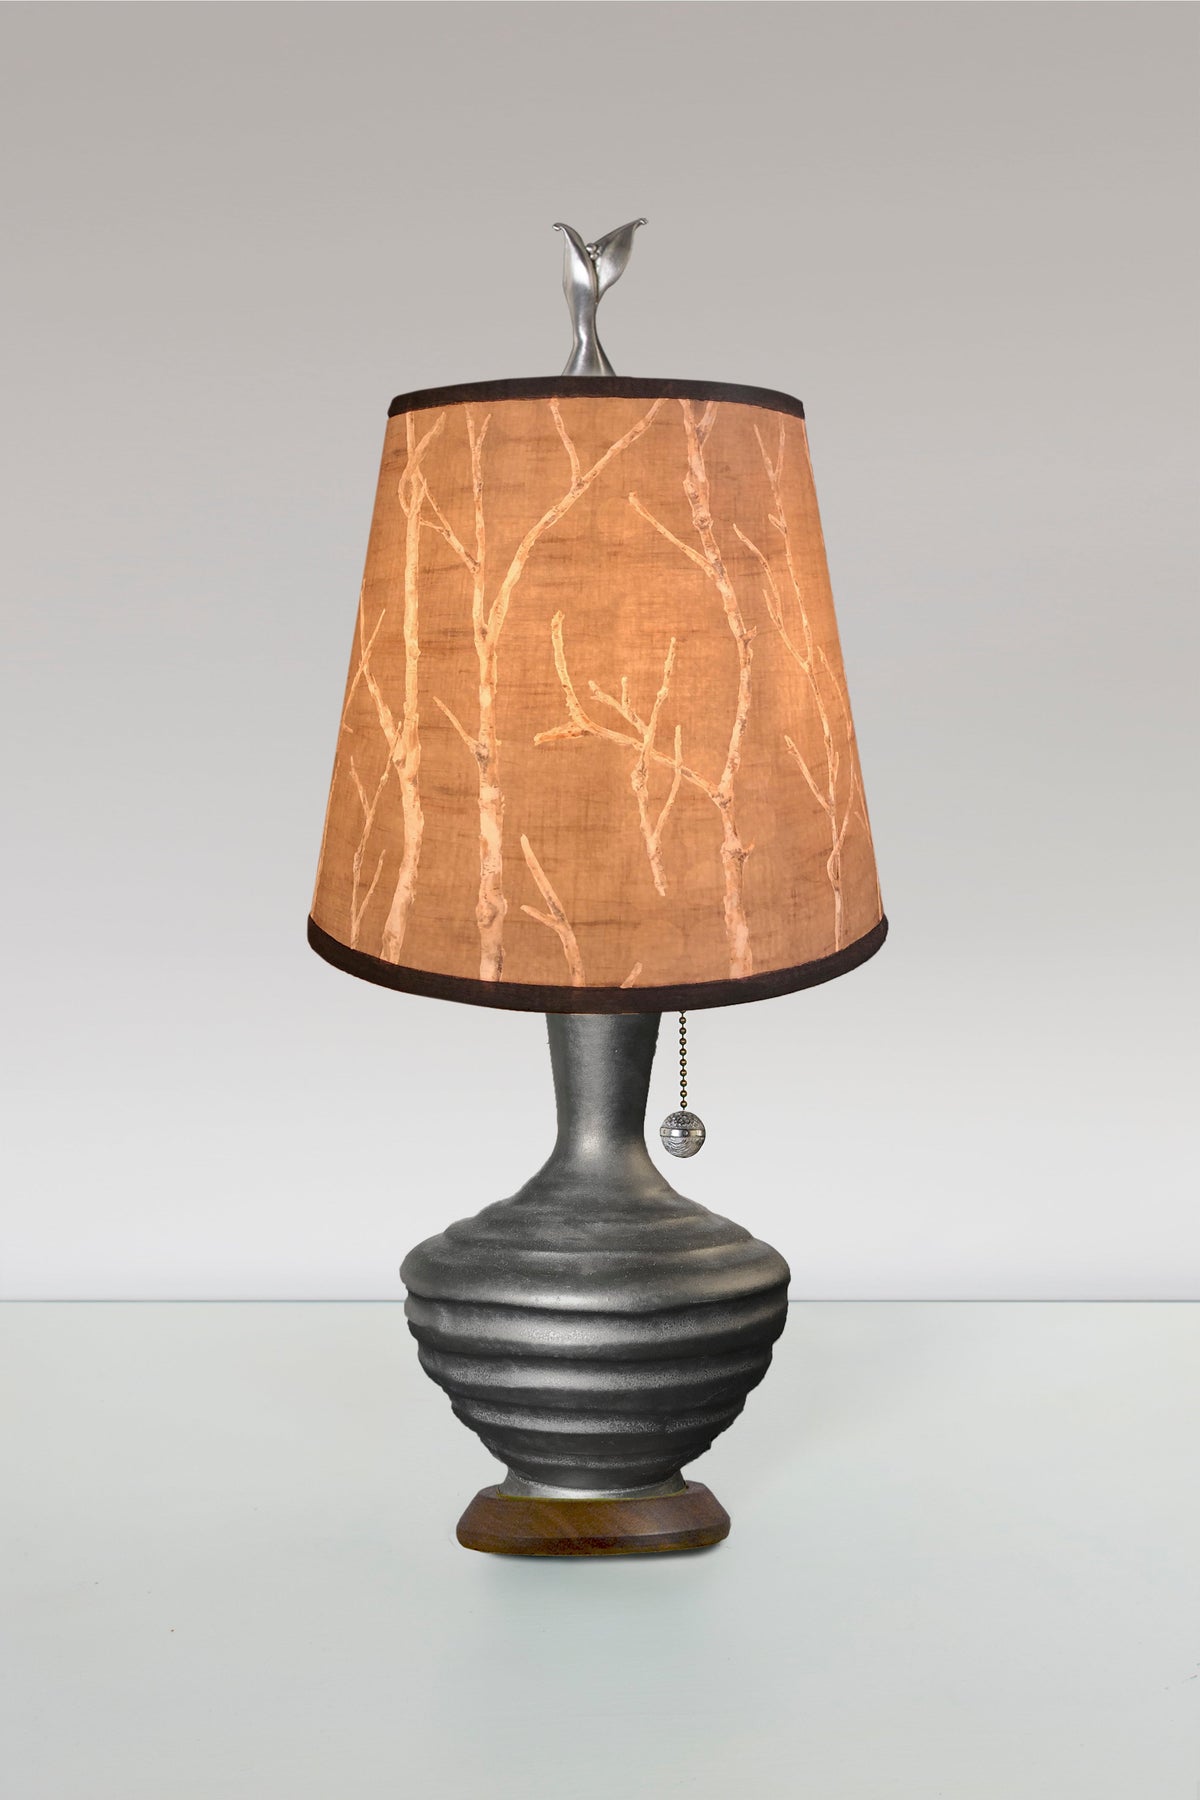 Janna Ugone &amp; Co Table Lamps Ceramic Table Lamp with Small Drum Shade in Twigs